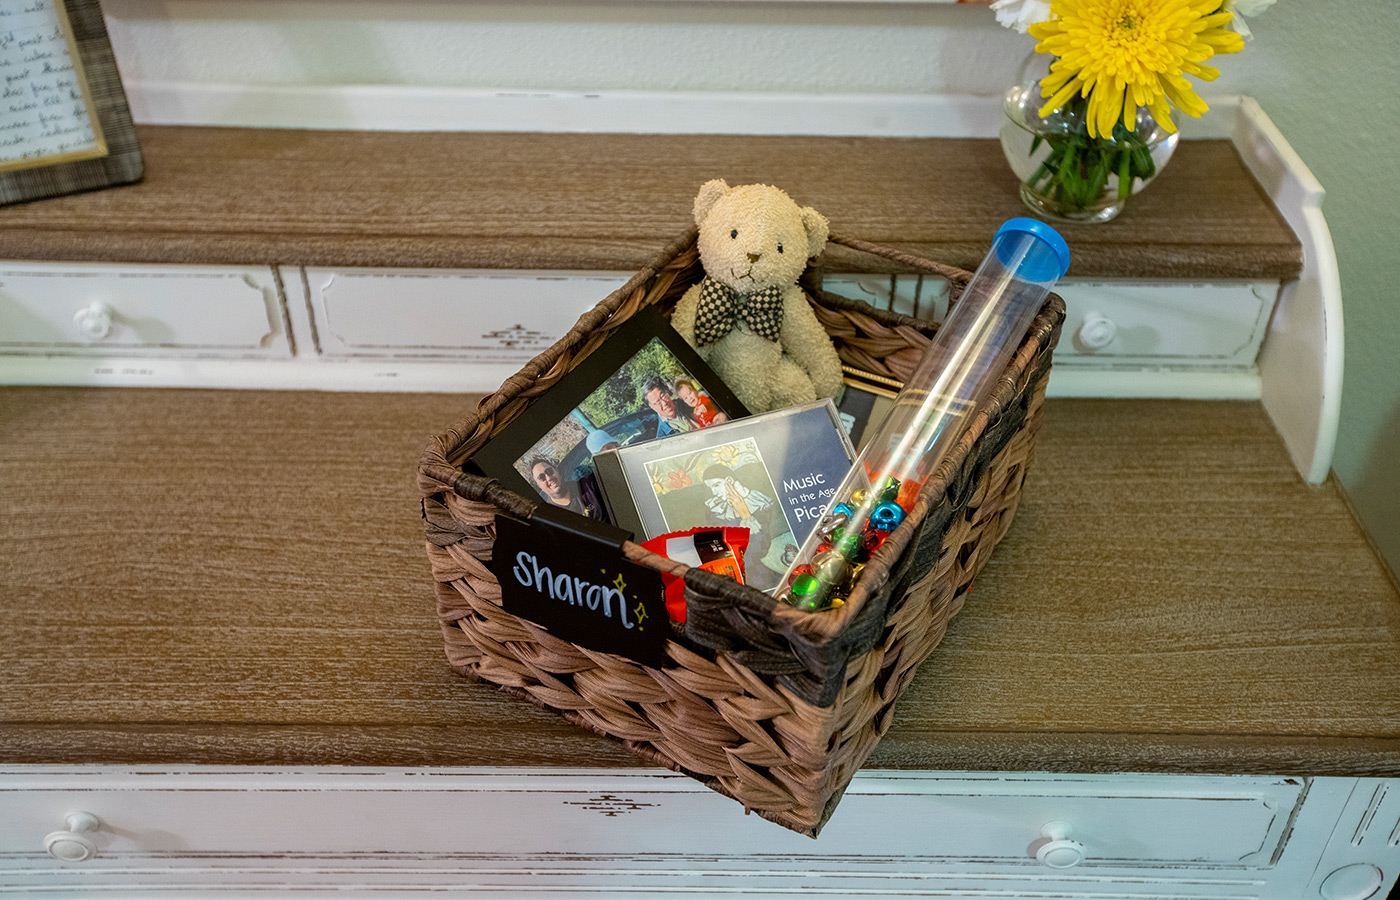 woven box on staircase with a teddy bear, CD and other assorted things